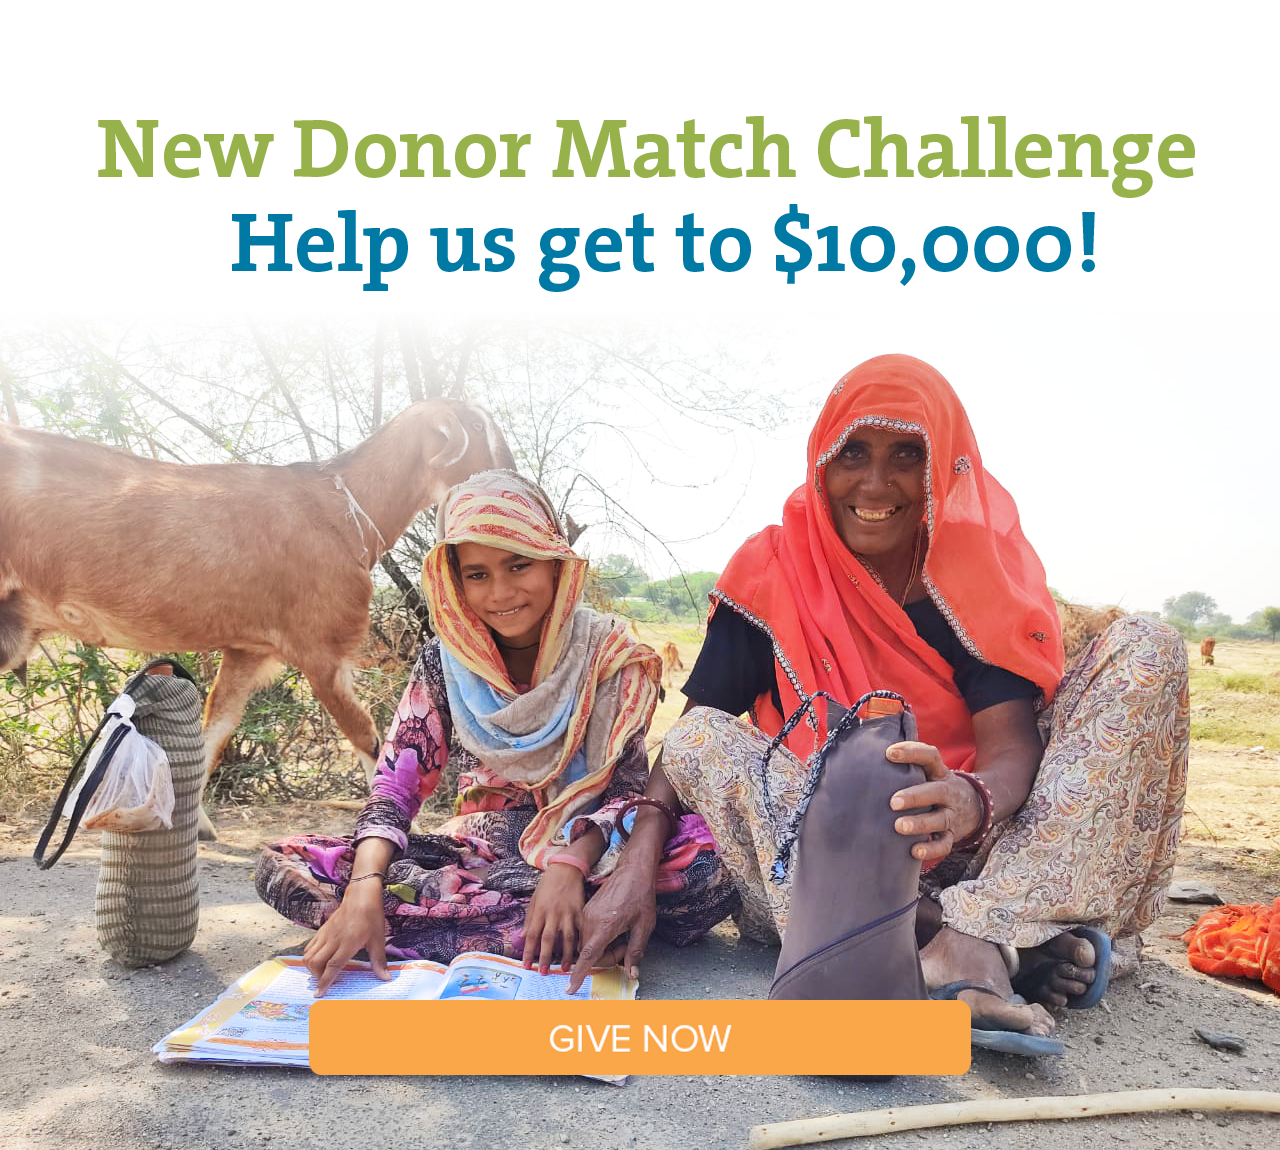 New donor match challenge, help us get to $10,000!